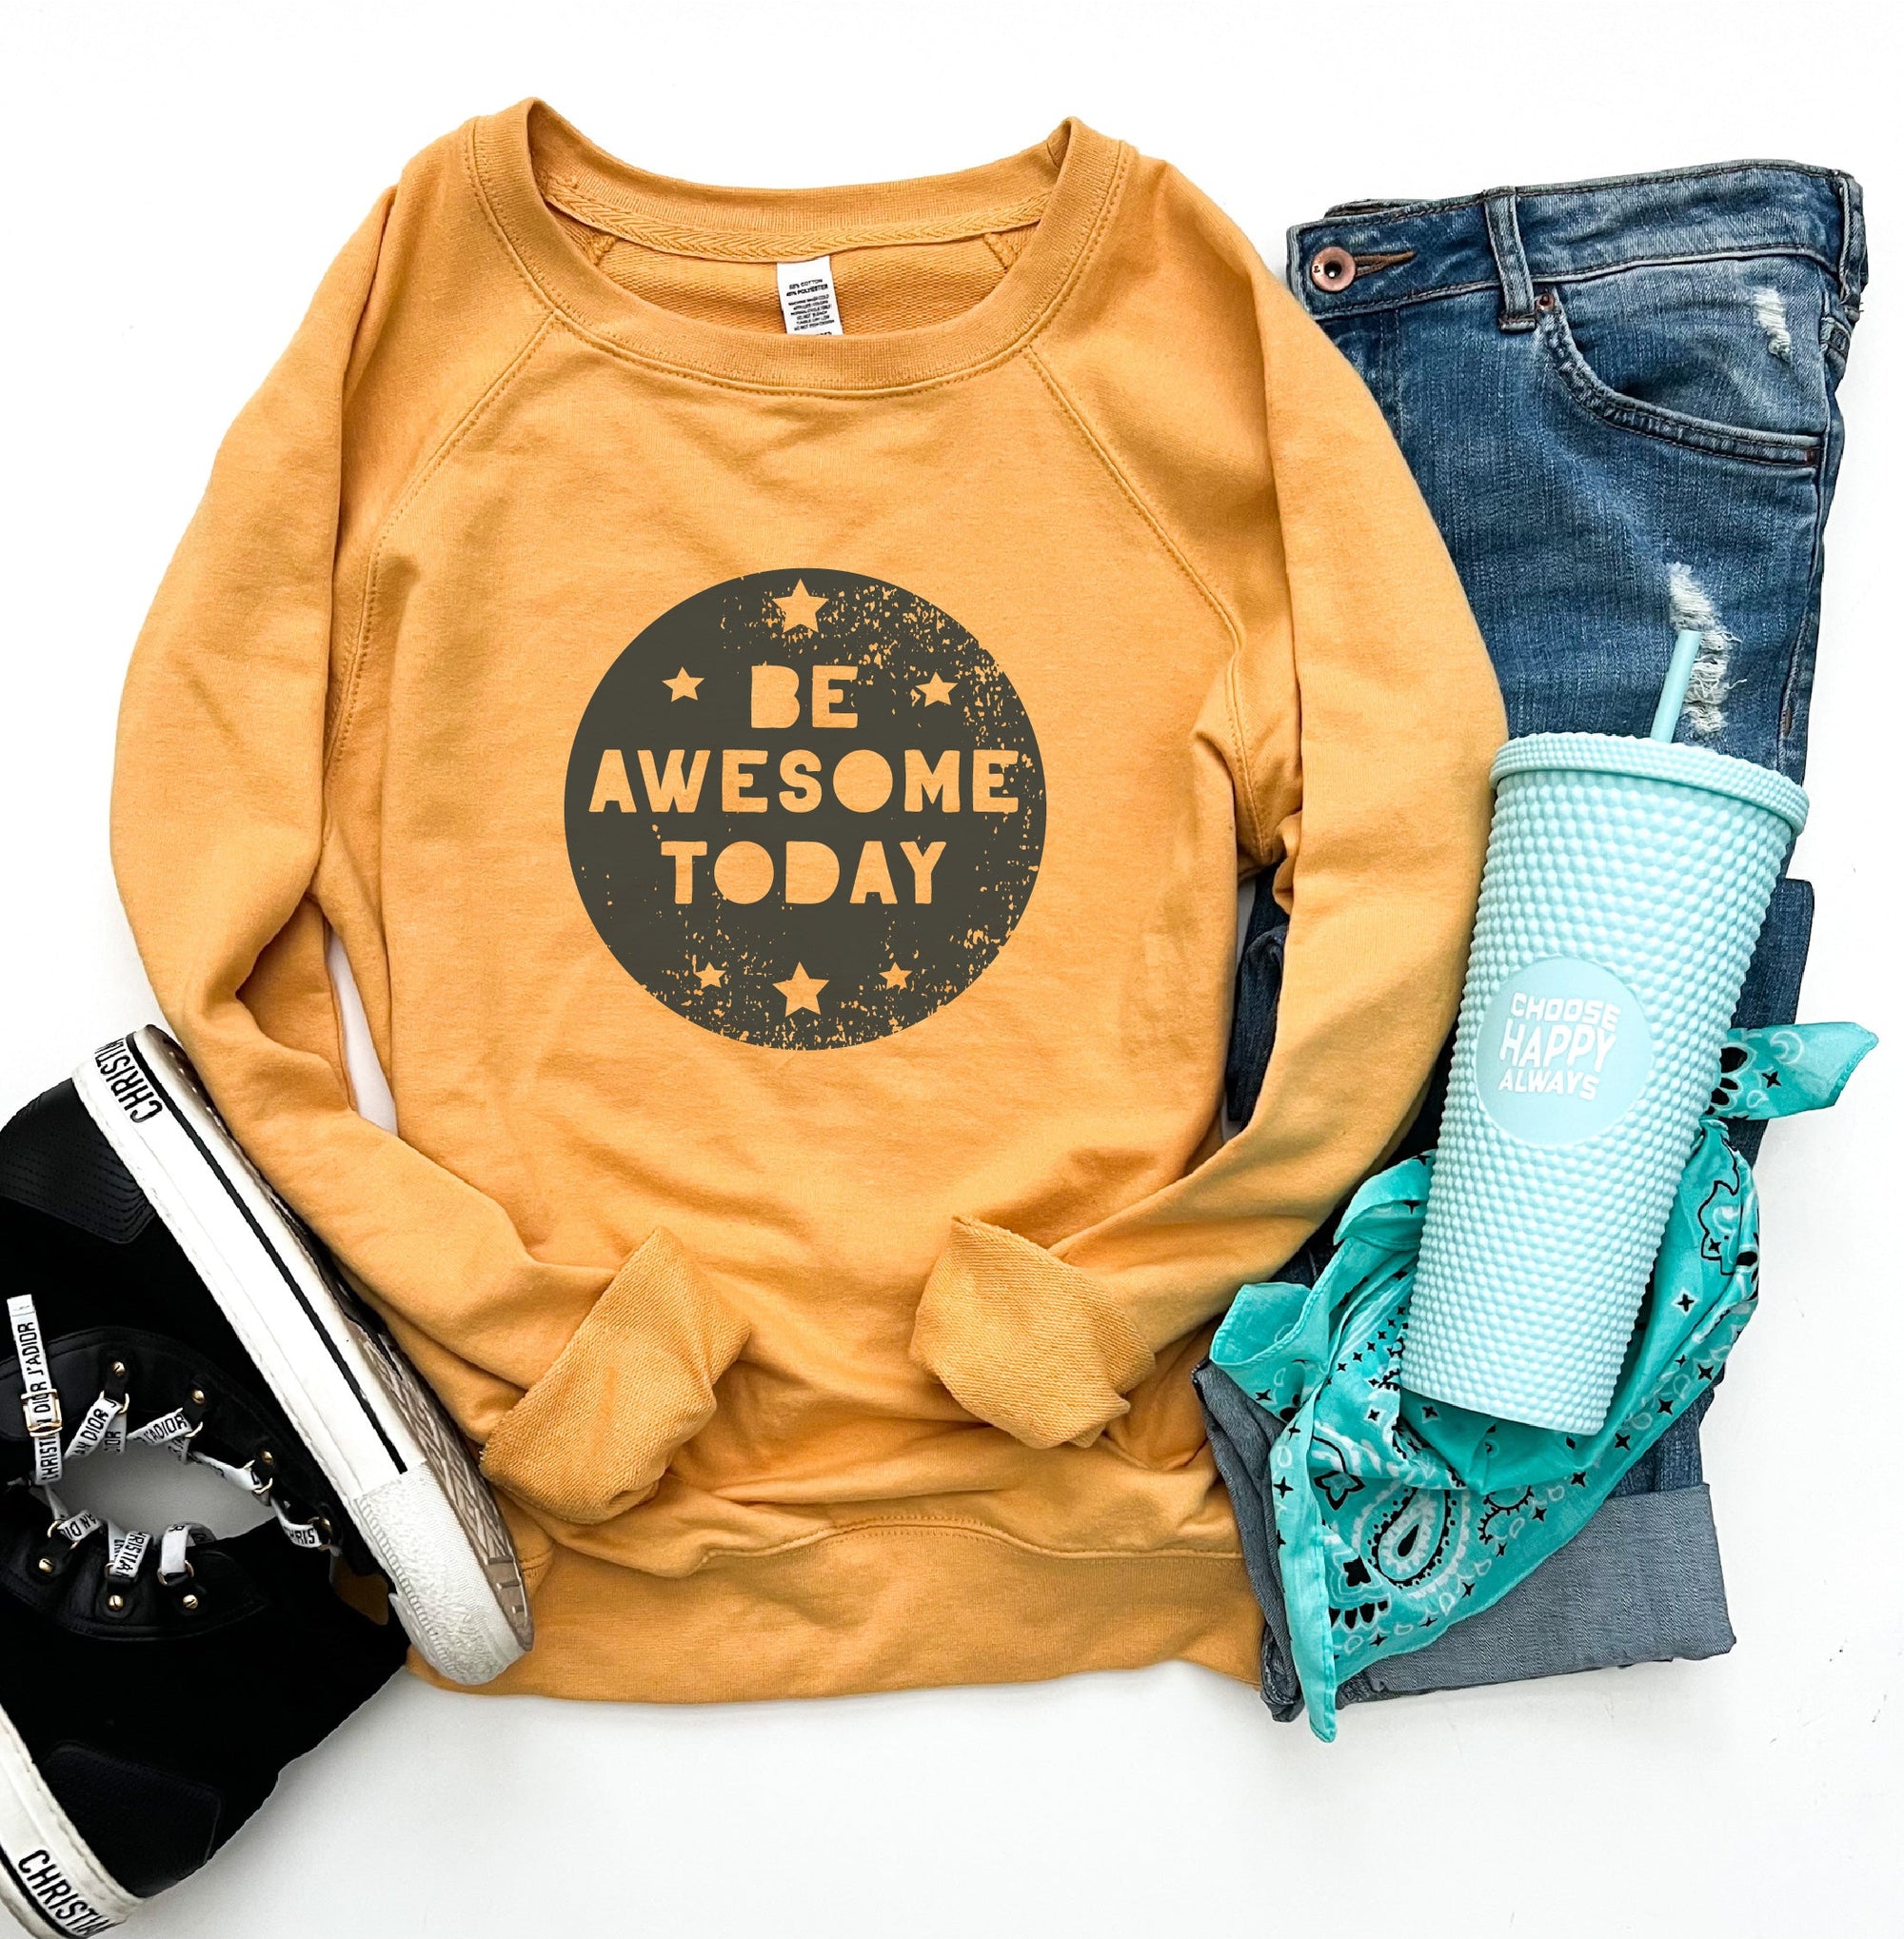 Be awesome today french terry raglan Fall French Terry raglan Lane seven French Terry raglan Harvest gold XS 